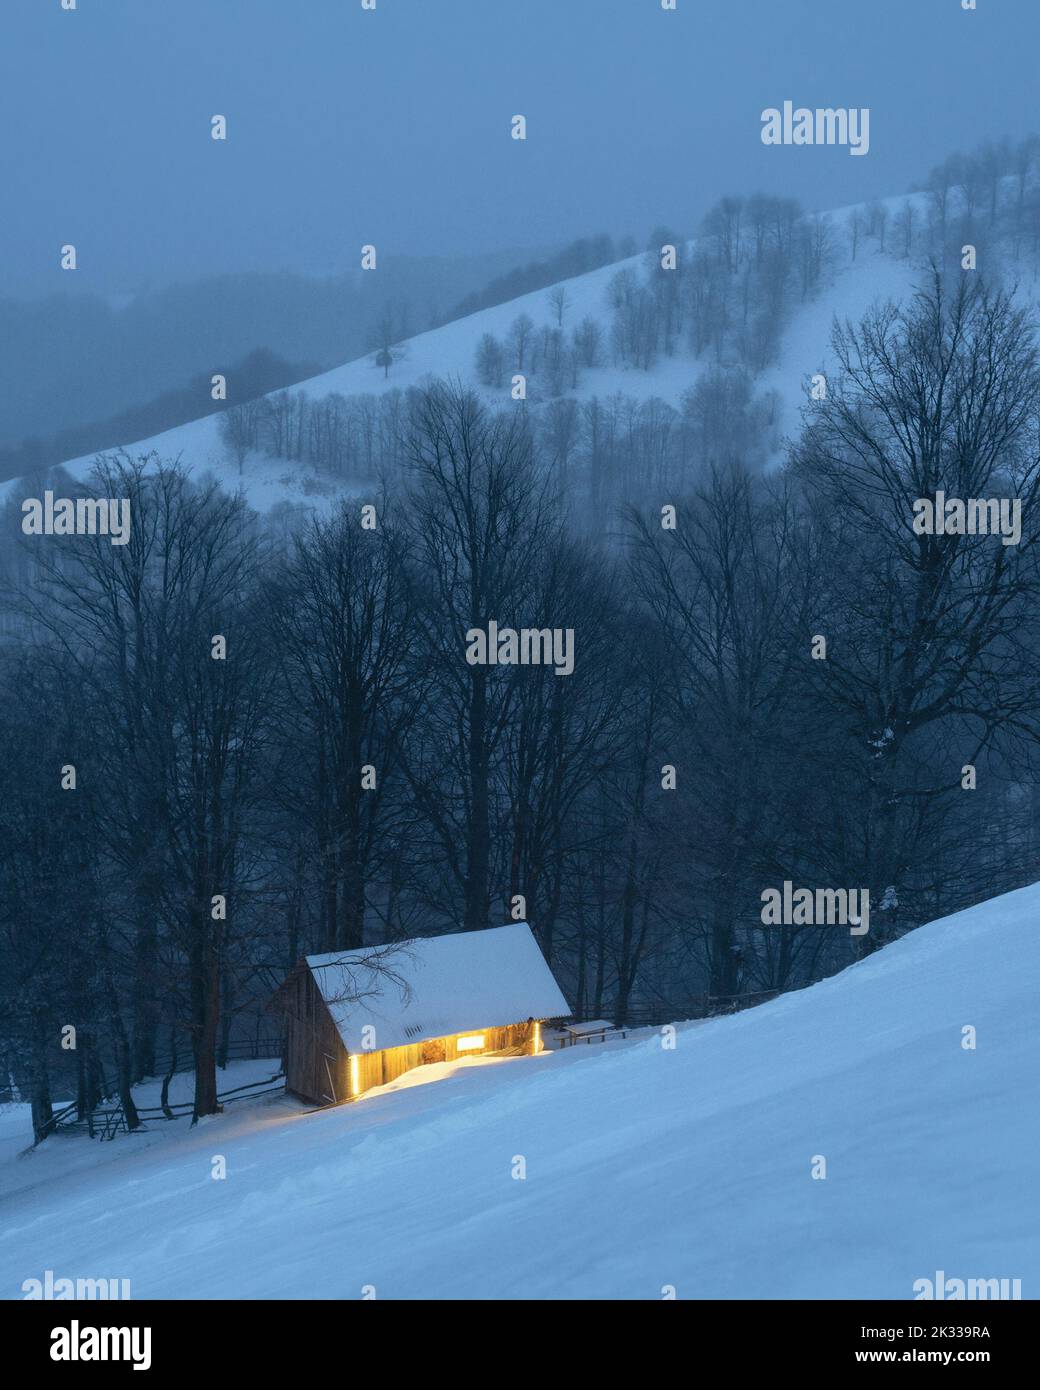 Evening twilight view of a lonely cabin in a snowy mountain forest in winter Stock Photo